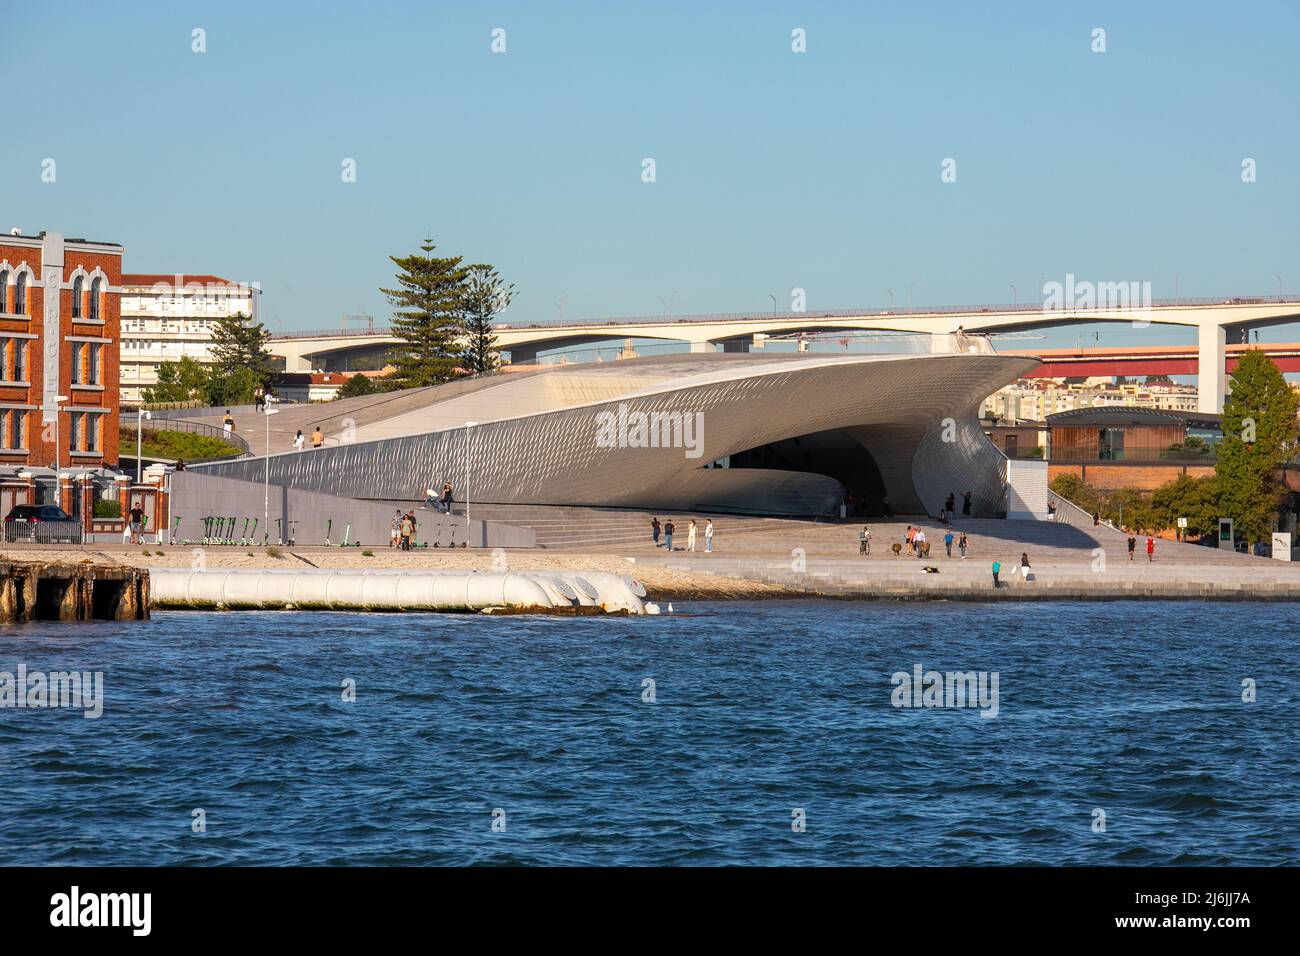 MAAT - Museum of Art, Architecture and Technology, Lisbon, Portugal Stock Photo